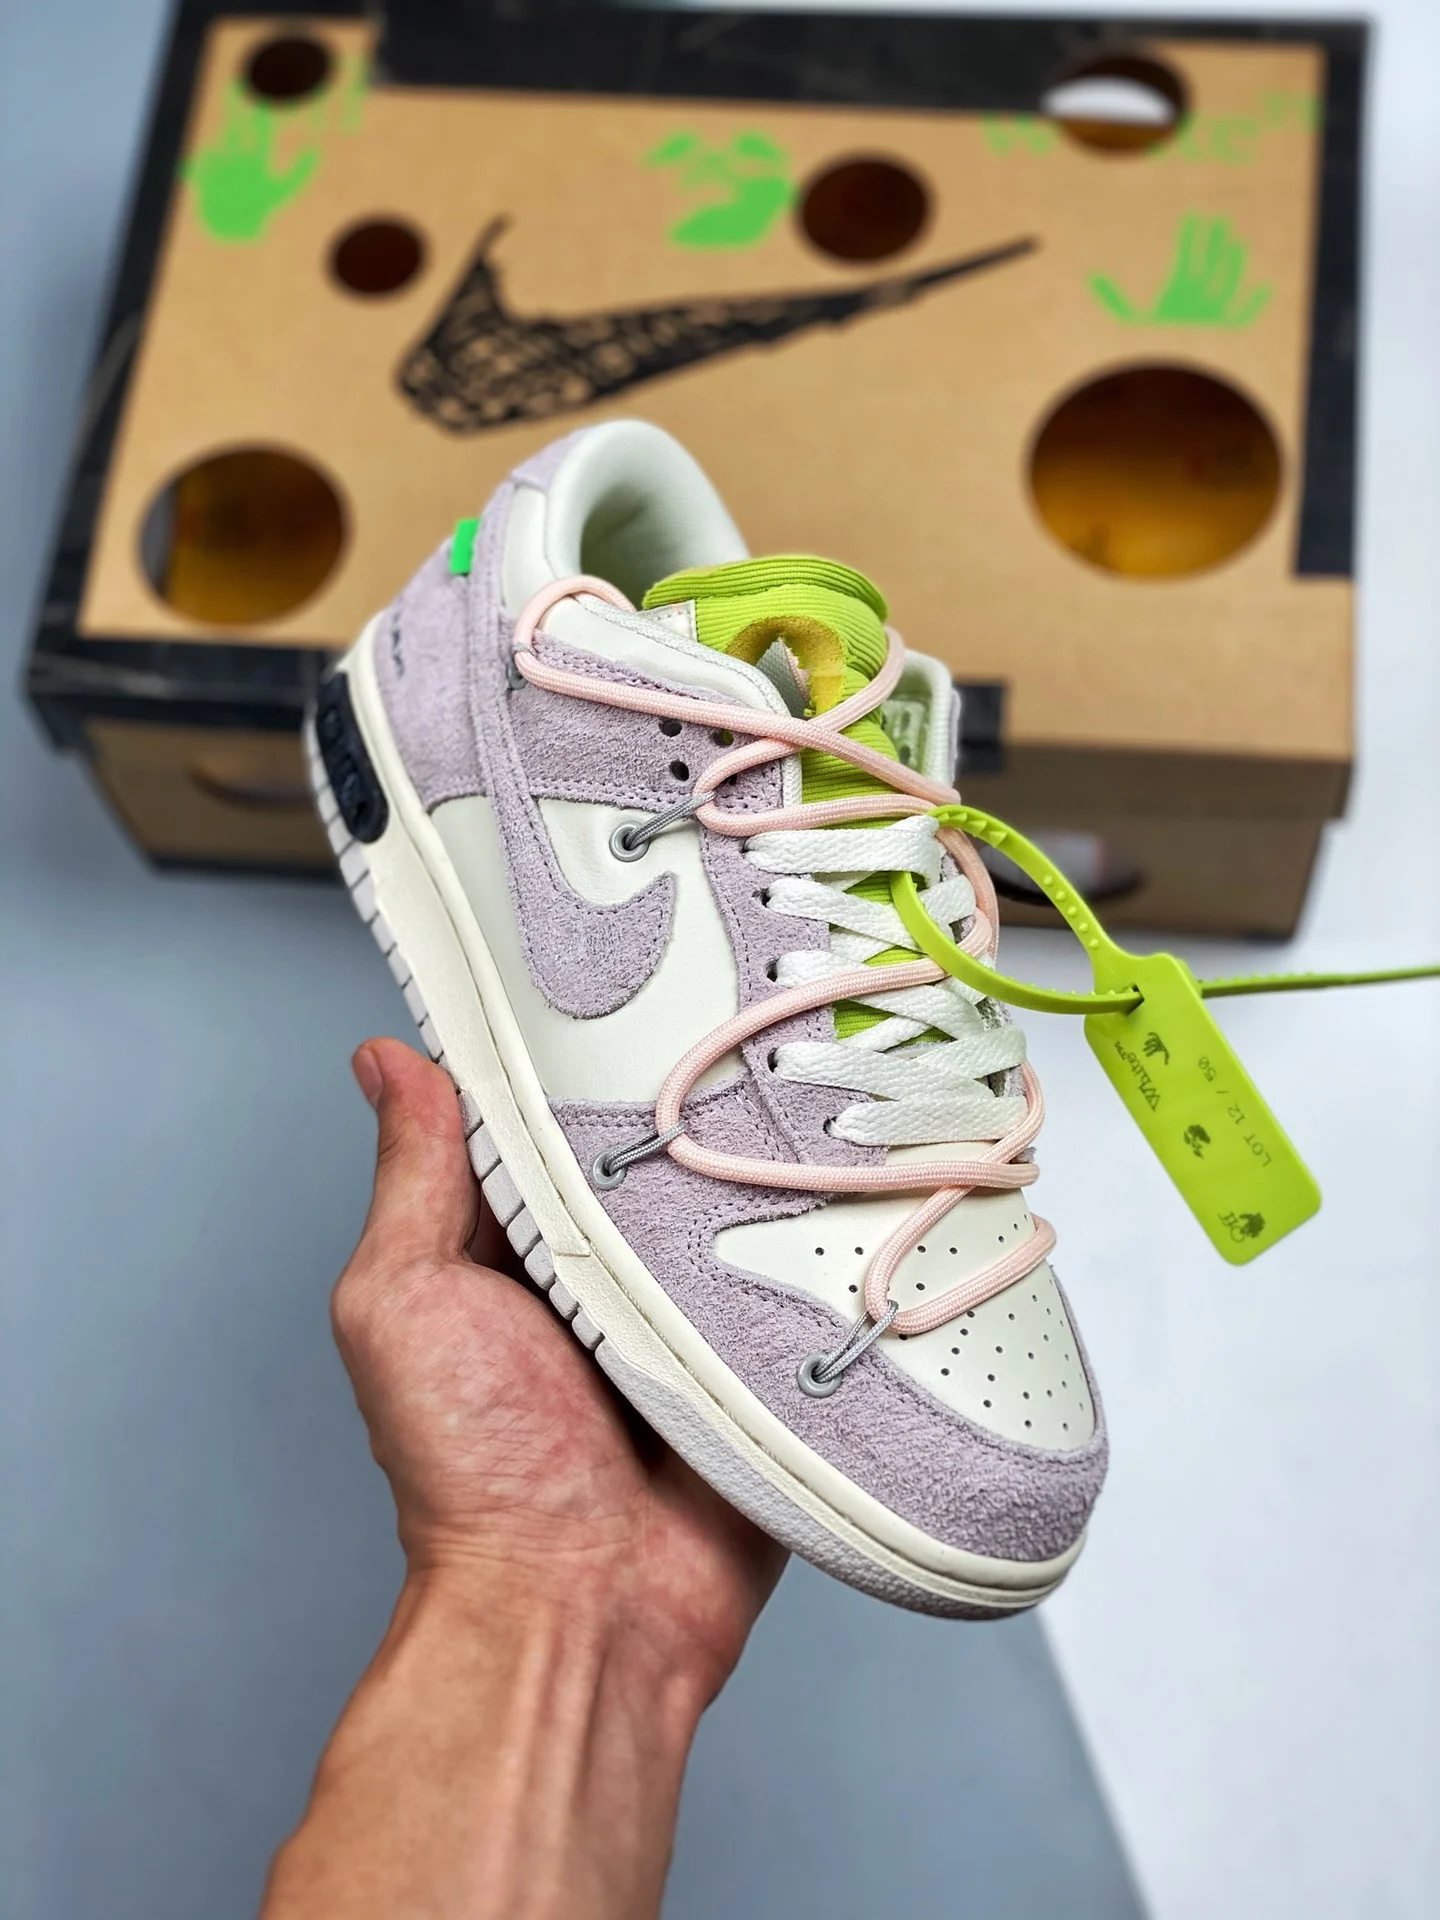 Off-White x Nike Dunk Low 12 of 50 Purple Sail For Sale